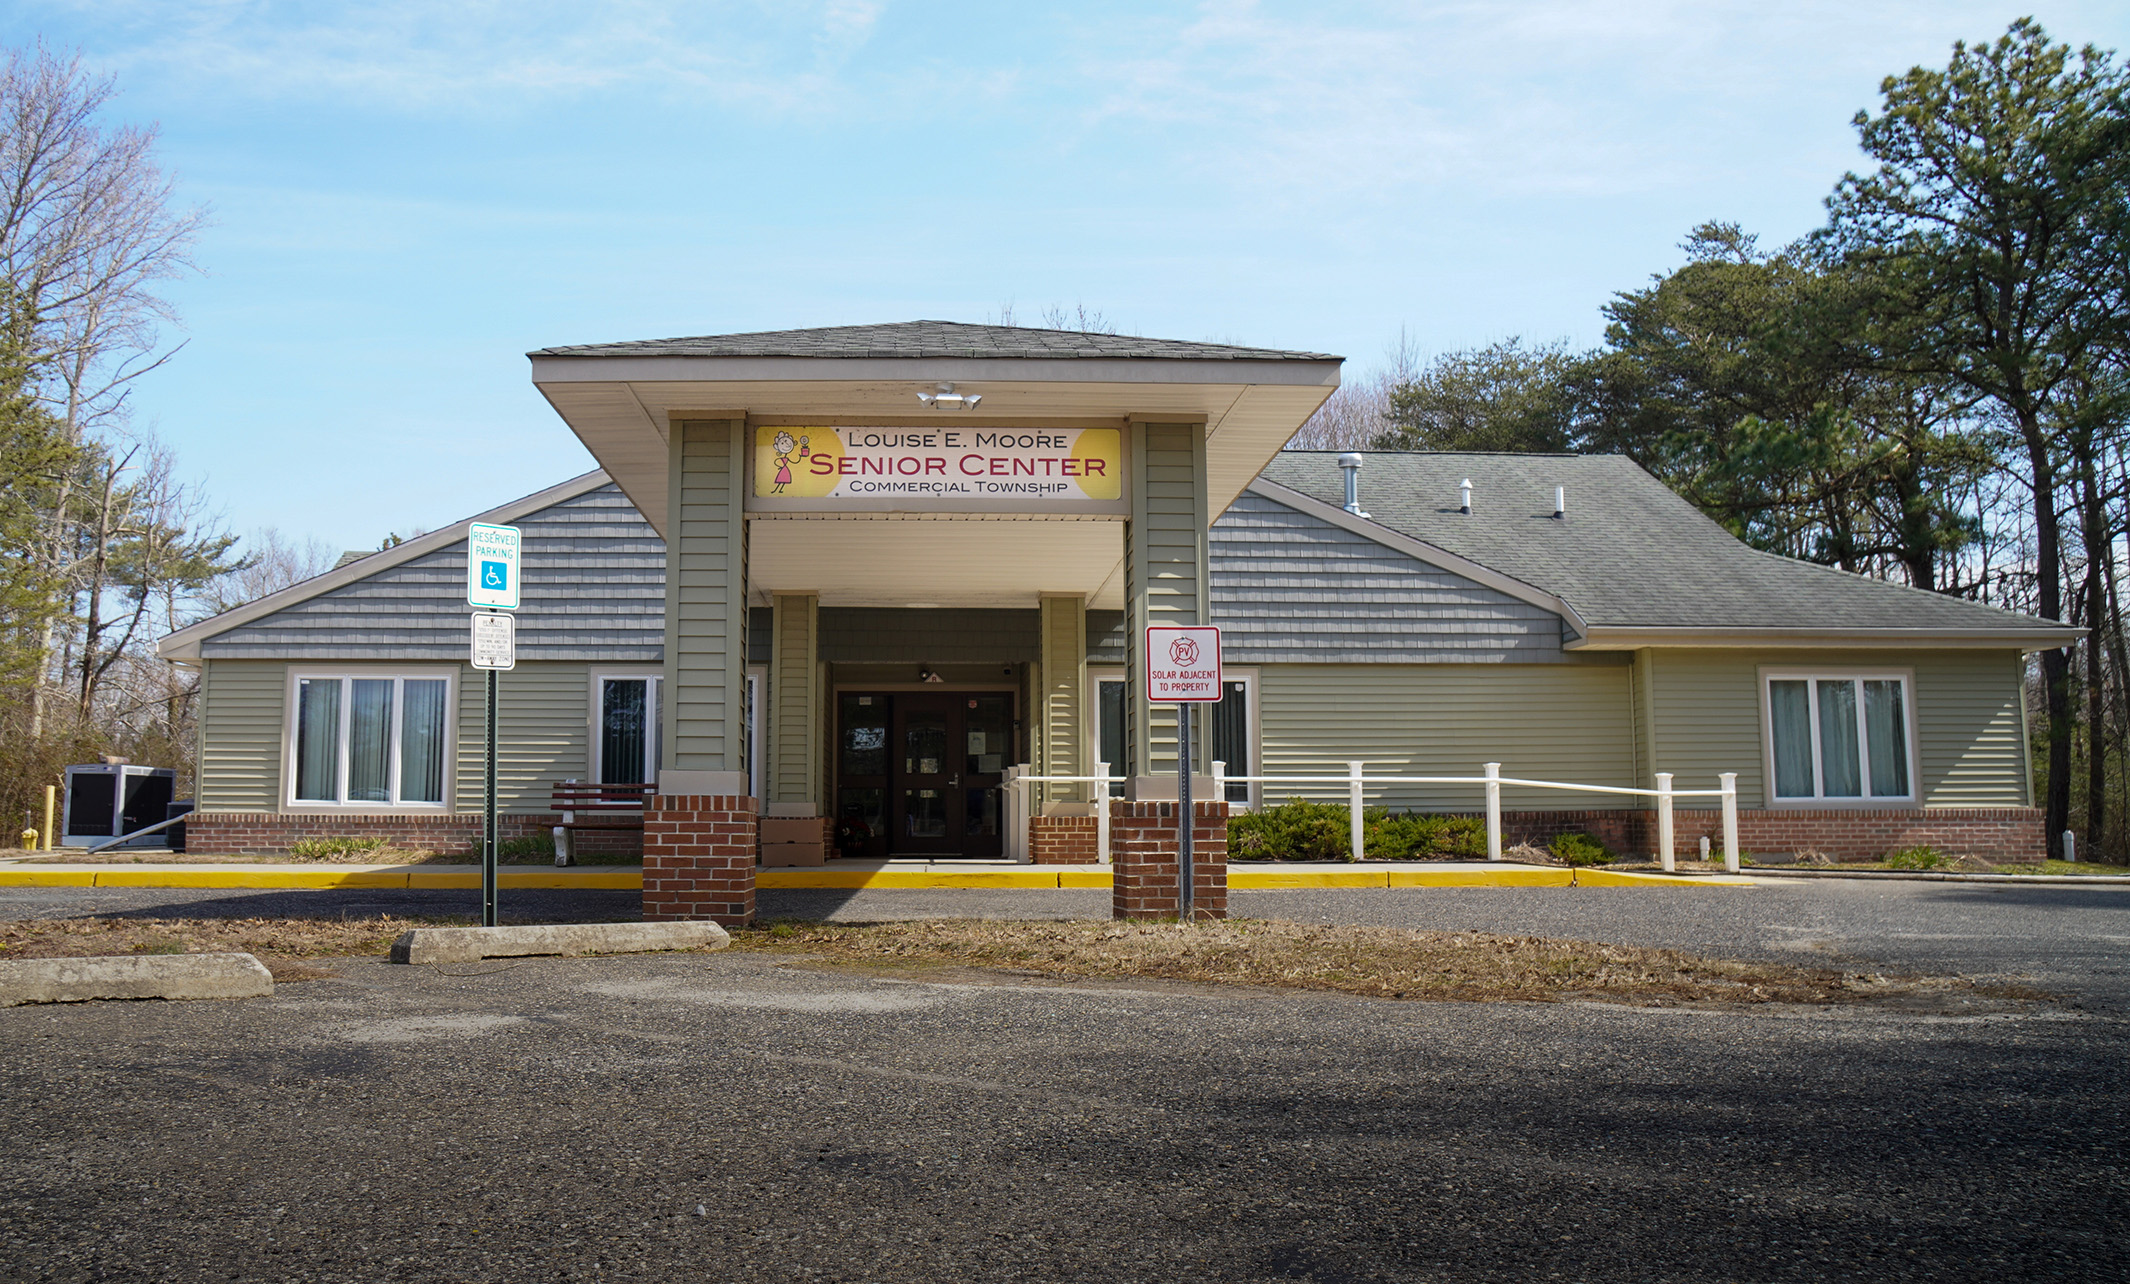 Family Success Center - Commercial Township